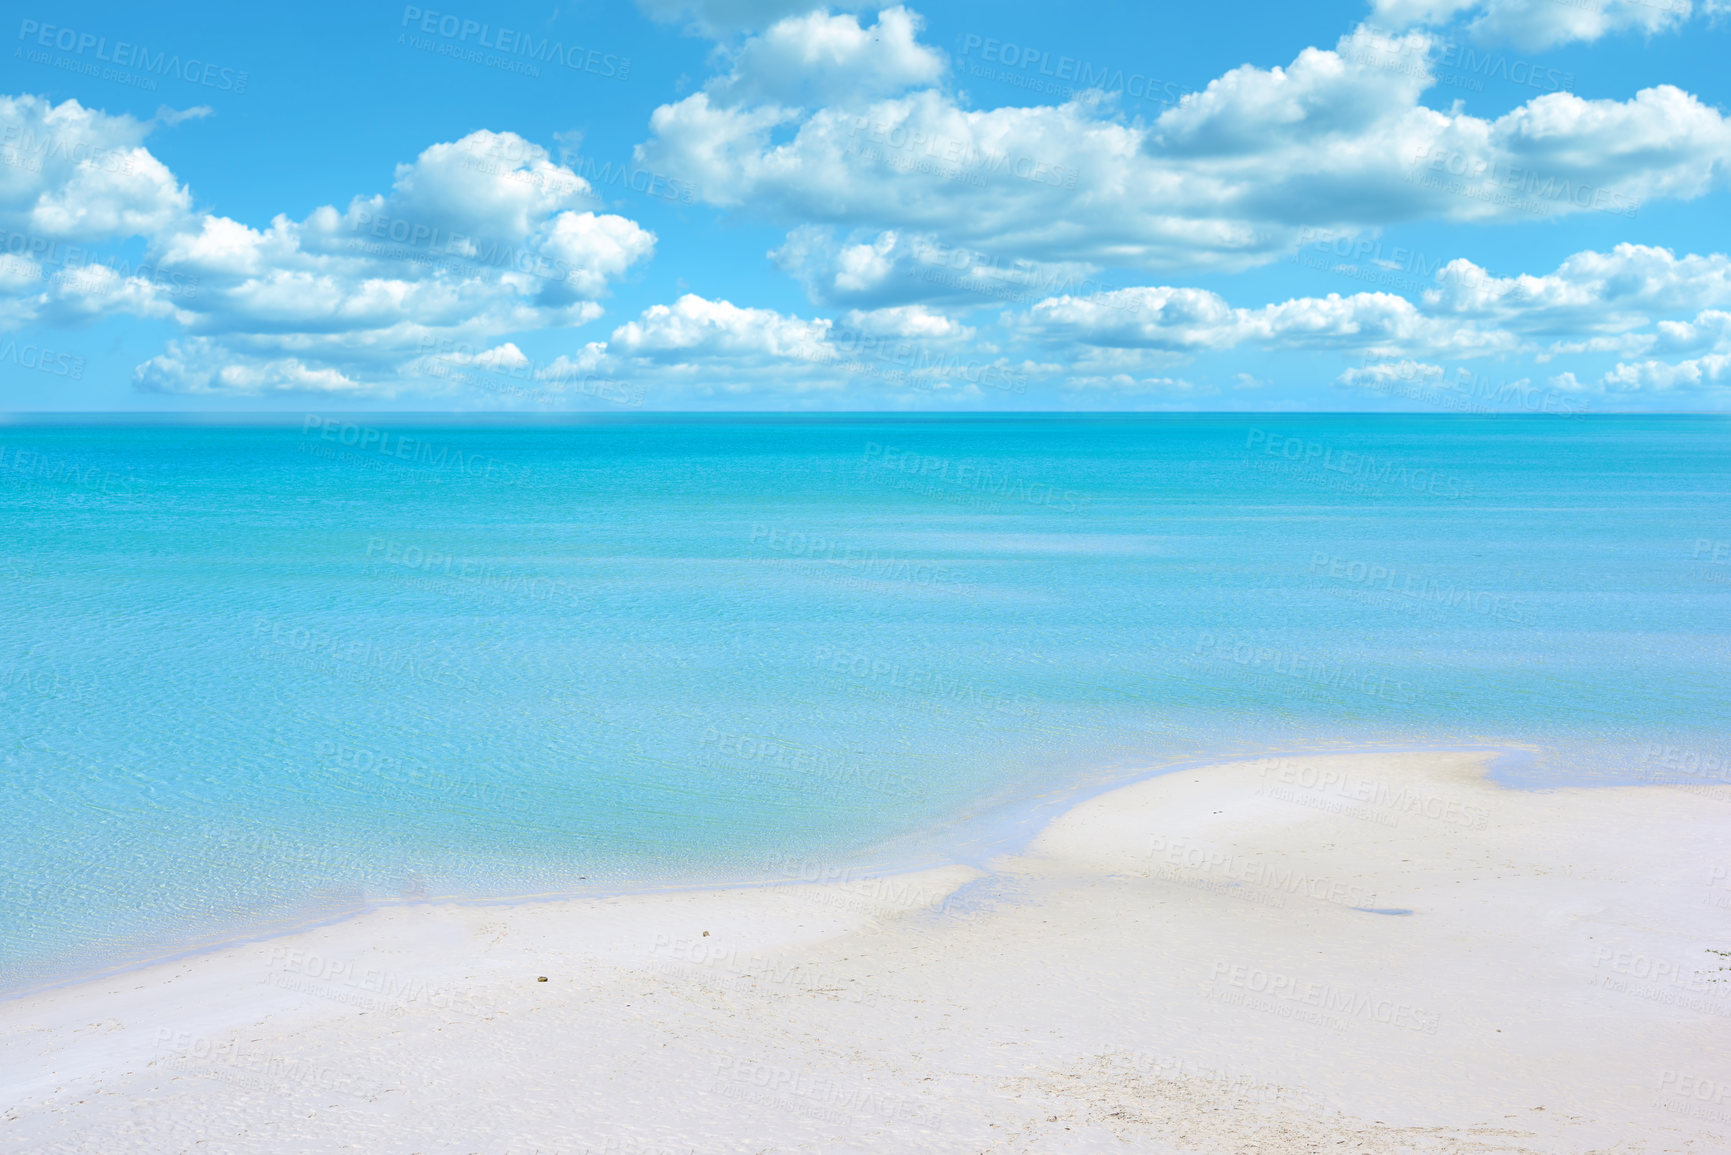 Buy stock photo Copy space at the beach with a cloudy blue sky background above the horizon. Calm ocean water across the sea along the shore. Peaceful and tranquil landscape for a relaxing and zen summer getaway